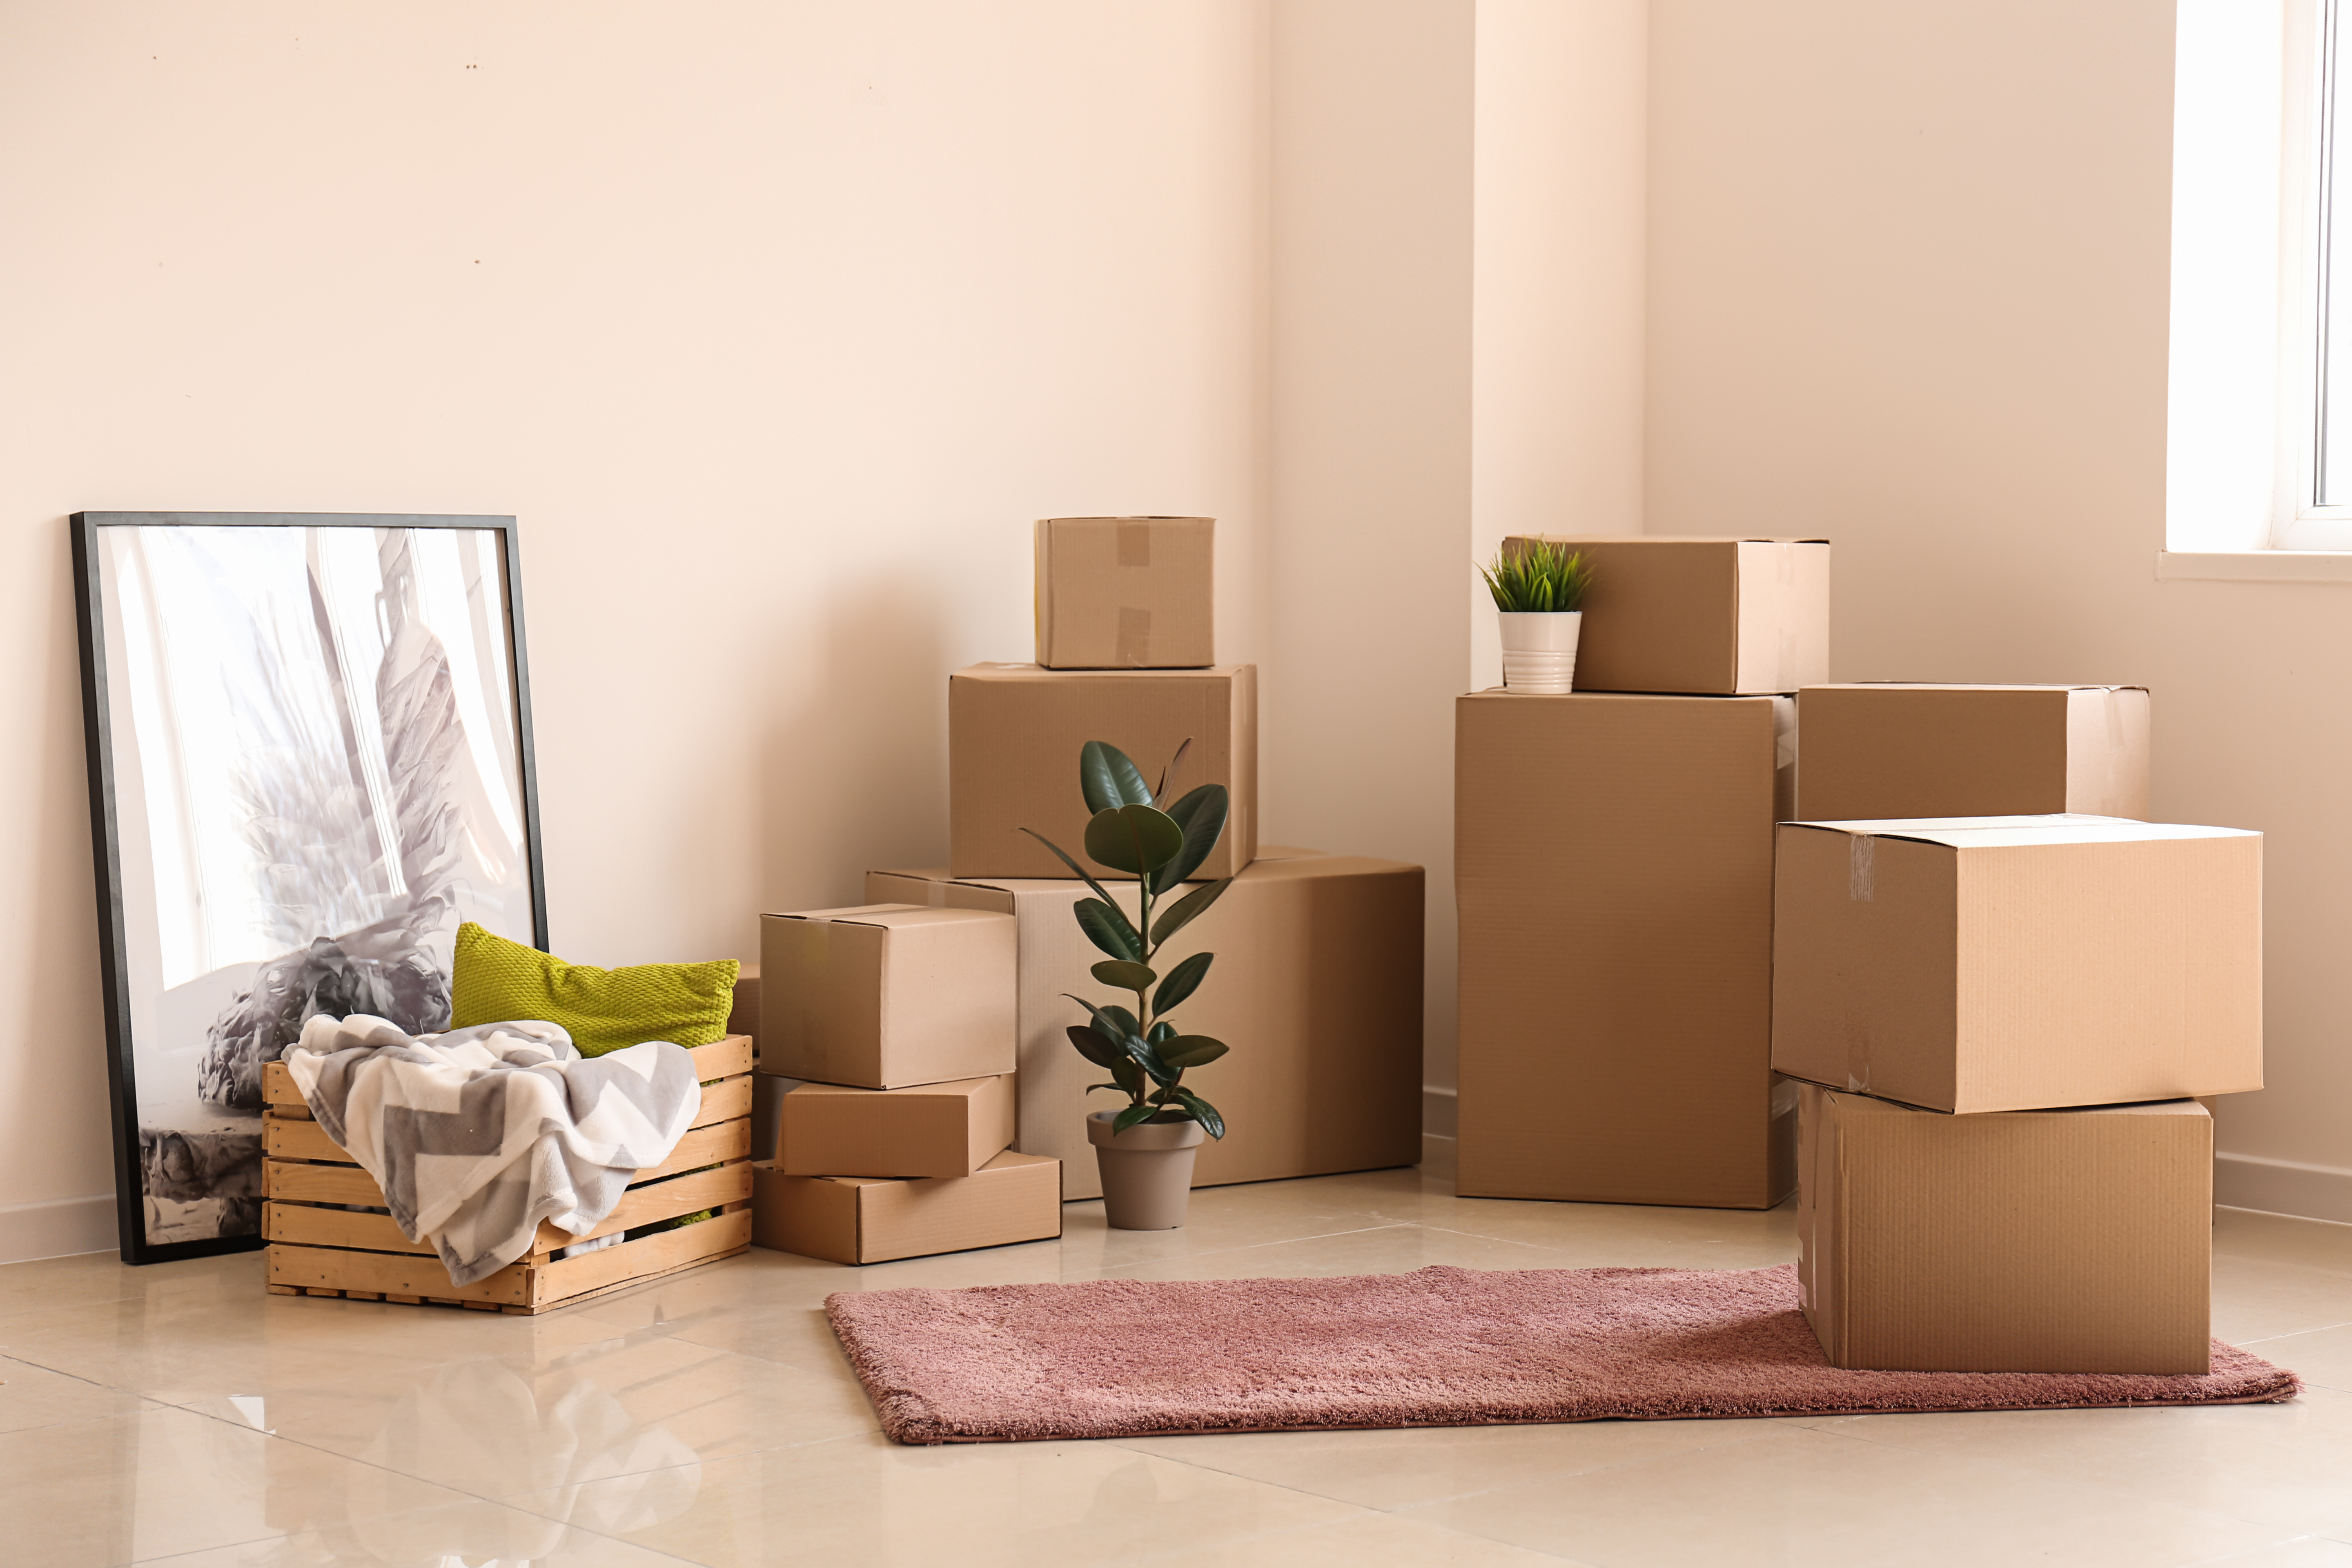 House removals in the West Midlands